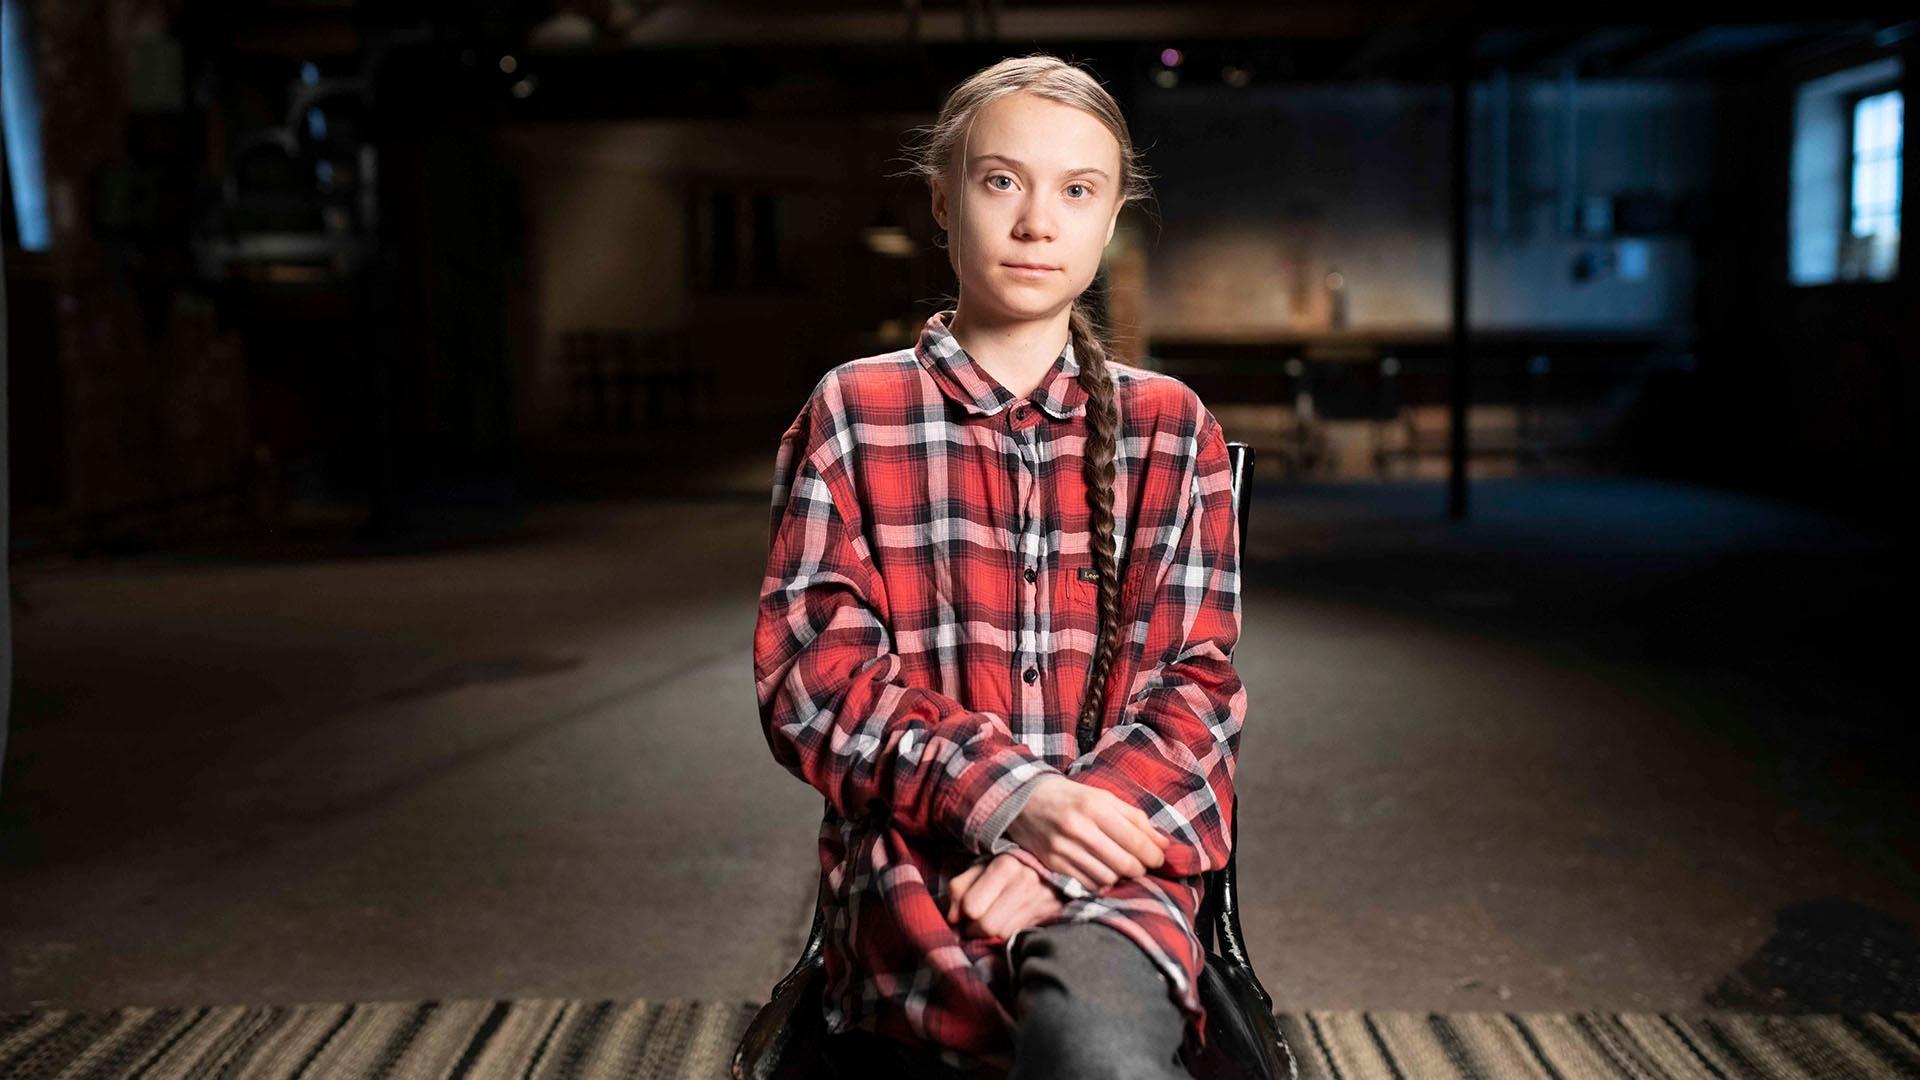 Greta Thunberg sitting in a chair for an interview.